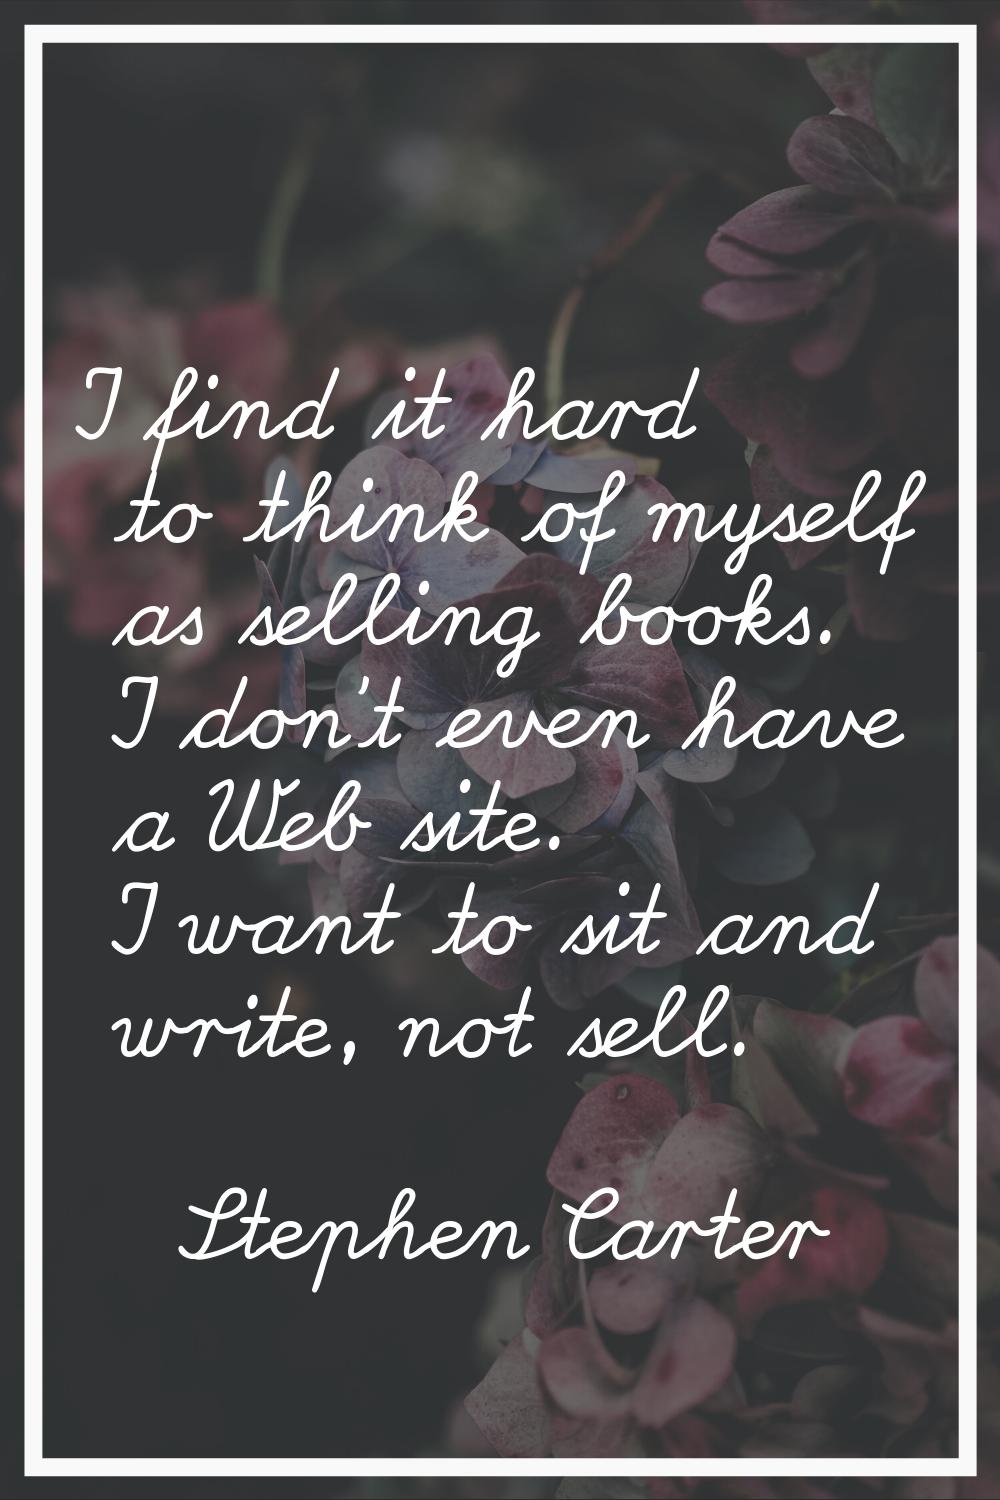 I find it hard to think of myself as selling books. I don't even have a Web site. I want to sit and